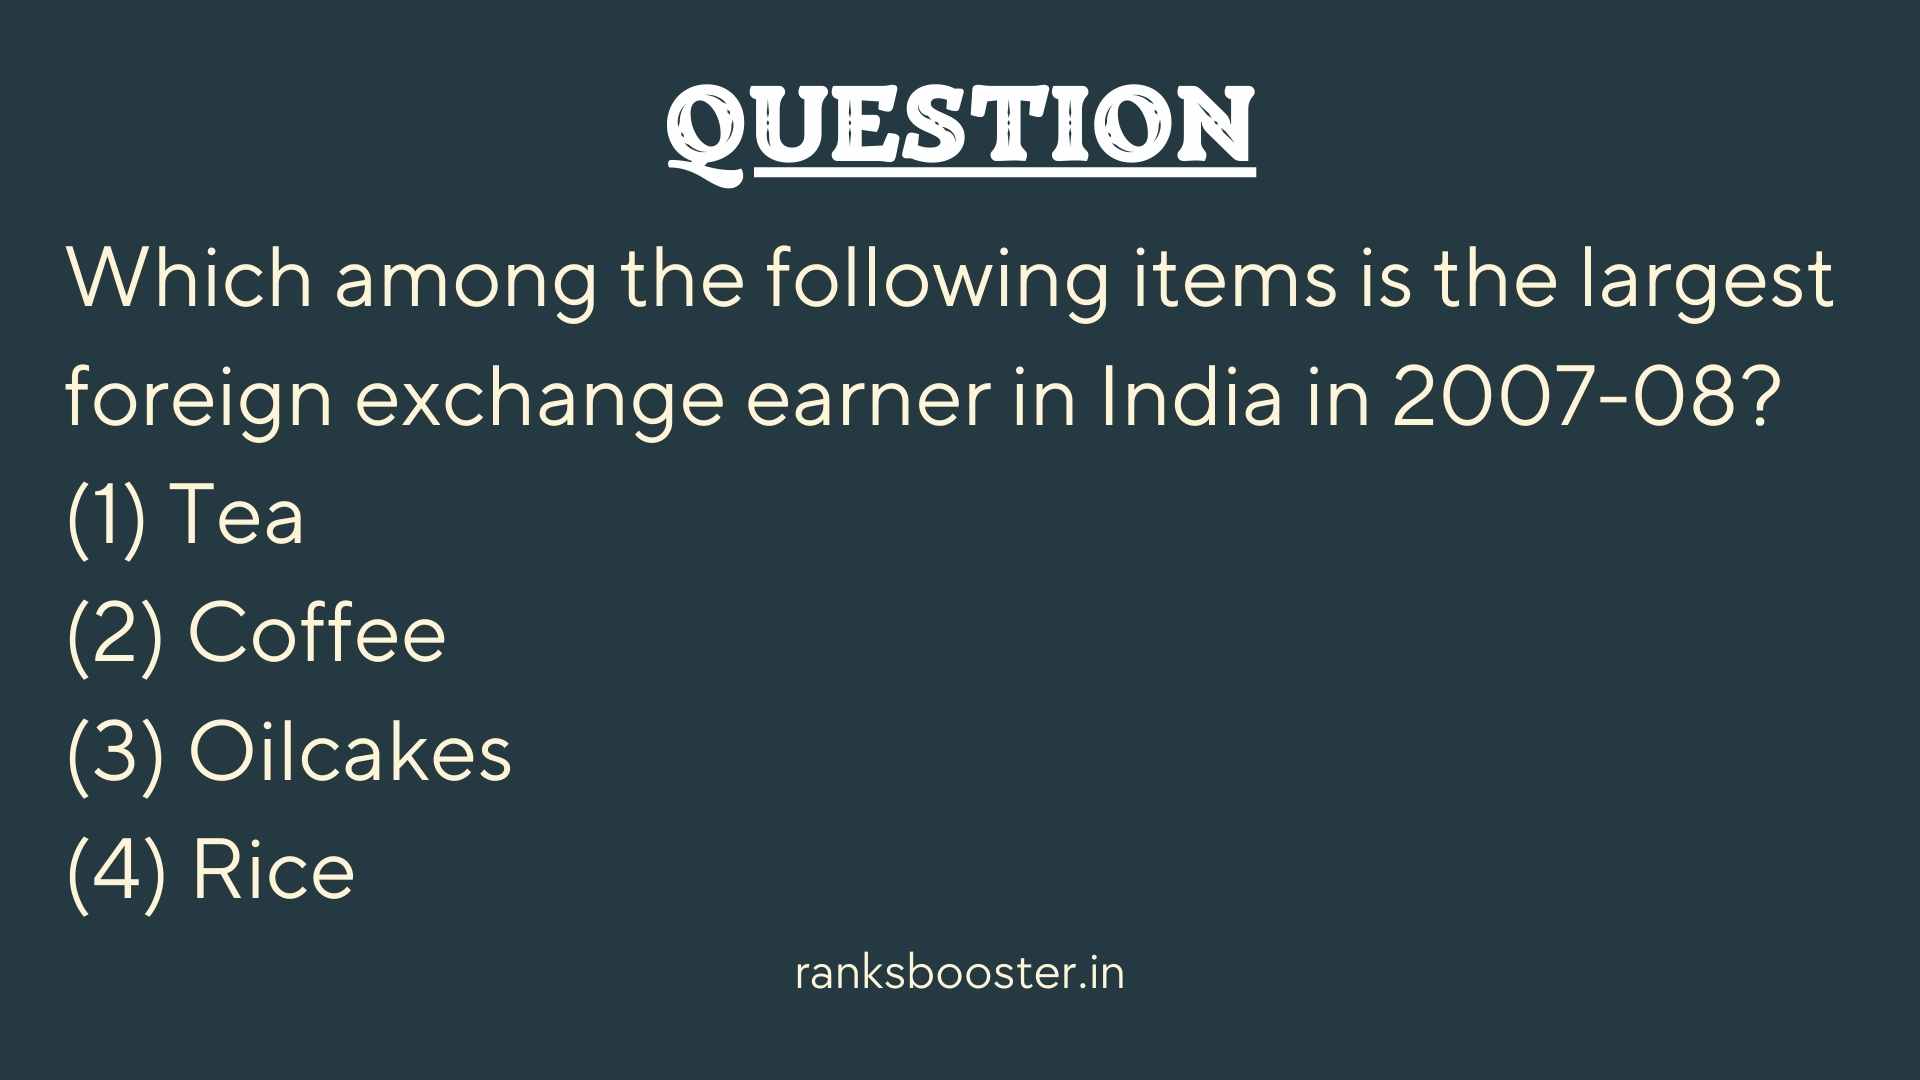 Which among the following items is the largest foreign exchange earner in India in 2007-08?